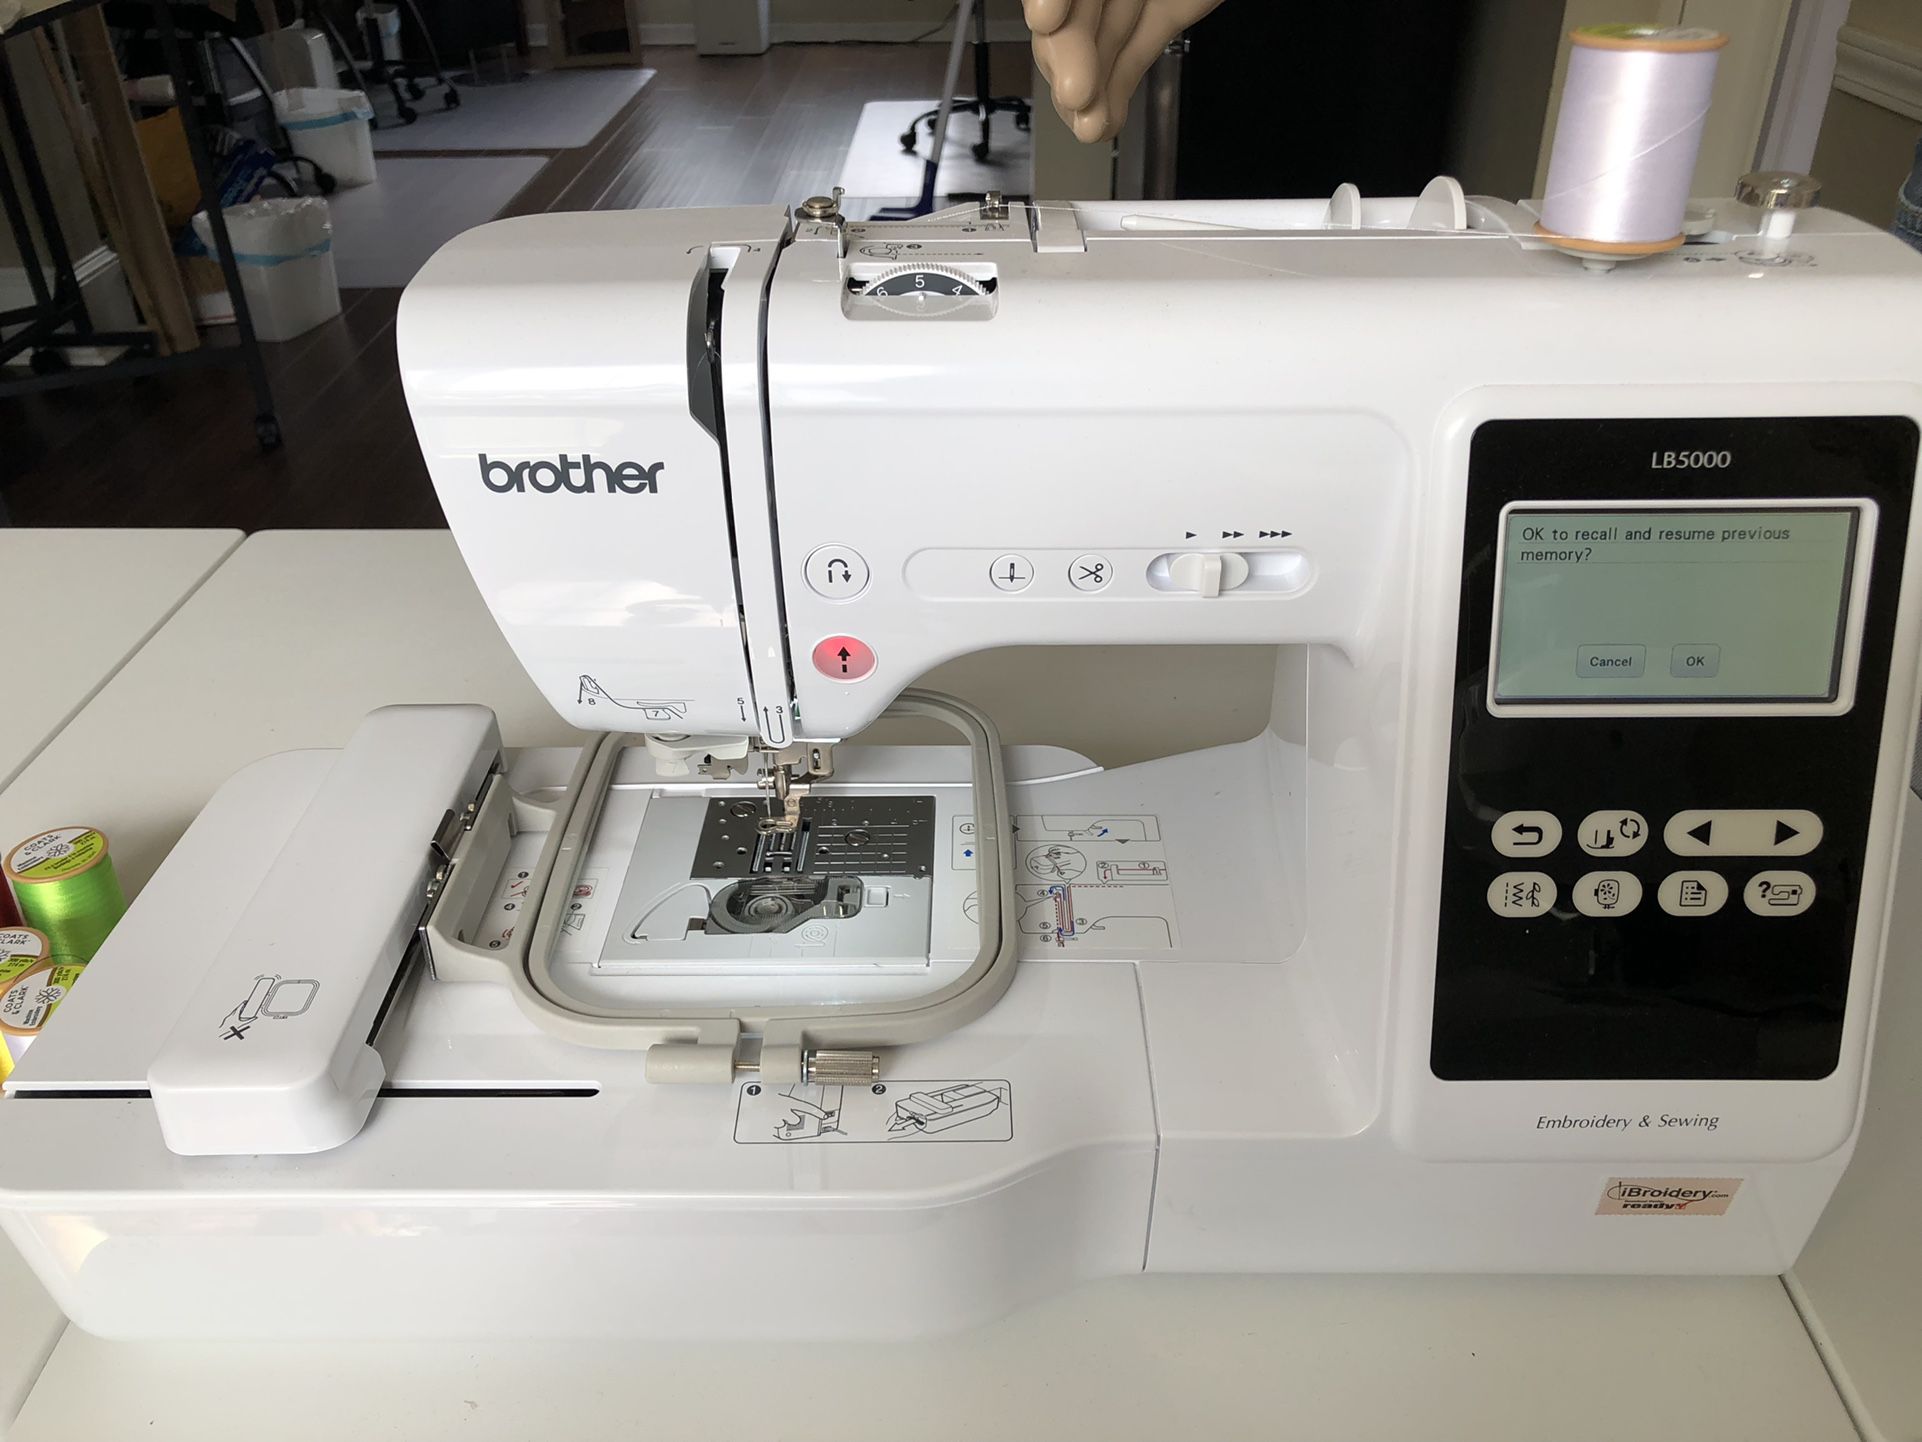 Brother Lb5000 Sewing And Embroidery Machine for Sale in Philadelphia, PA -  OfferUp